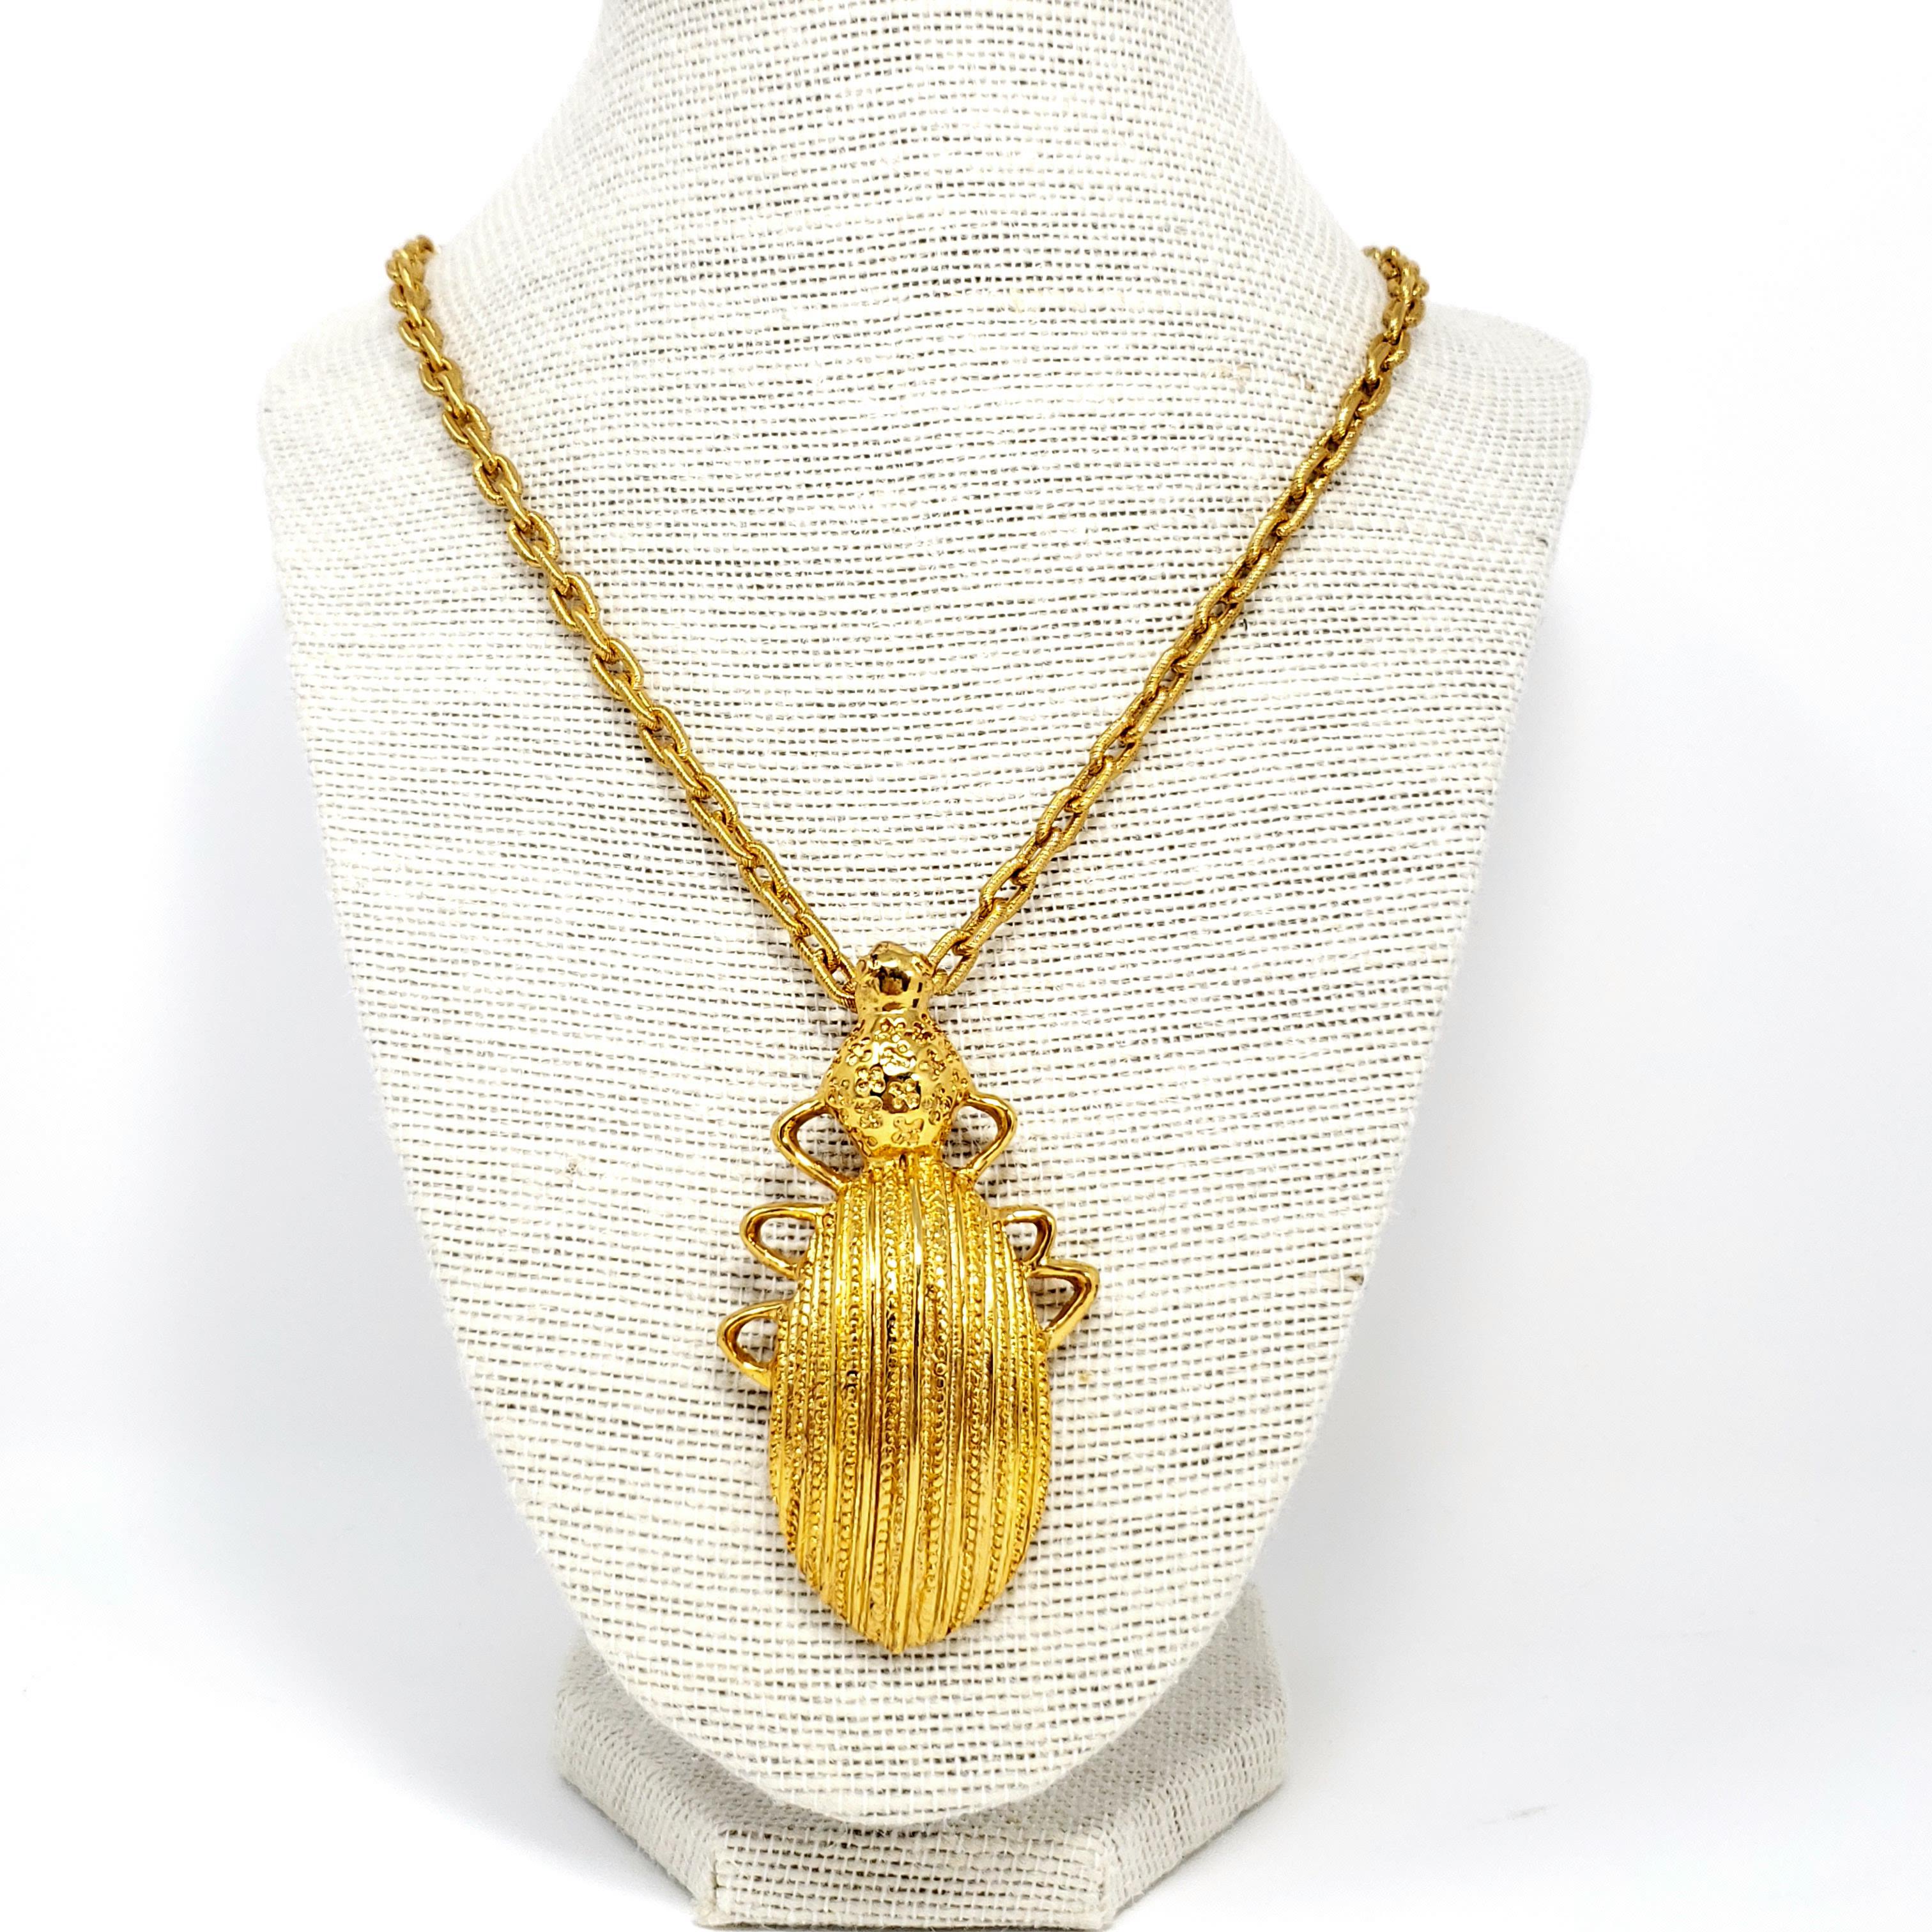 Necklace by Oscar de la Renta featuring a dangling scarab pendant on a long textured gold-plated link chain.

Hallmarks: Oscar de la Renta, Made in USA
Necklace length 76 cm / 30 in plus 10cm / 4 in extension chain